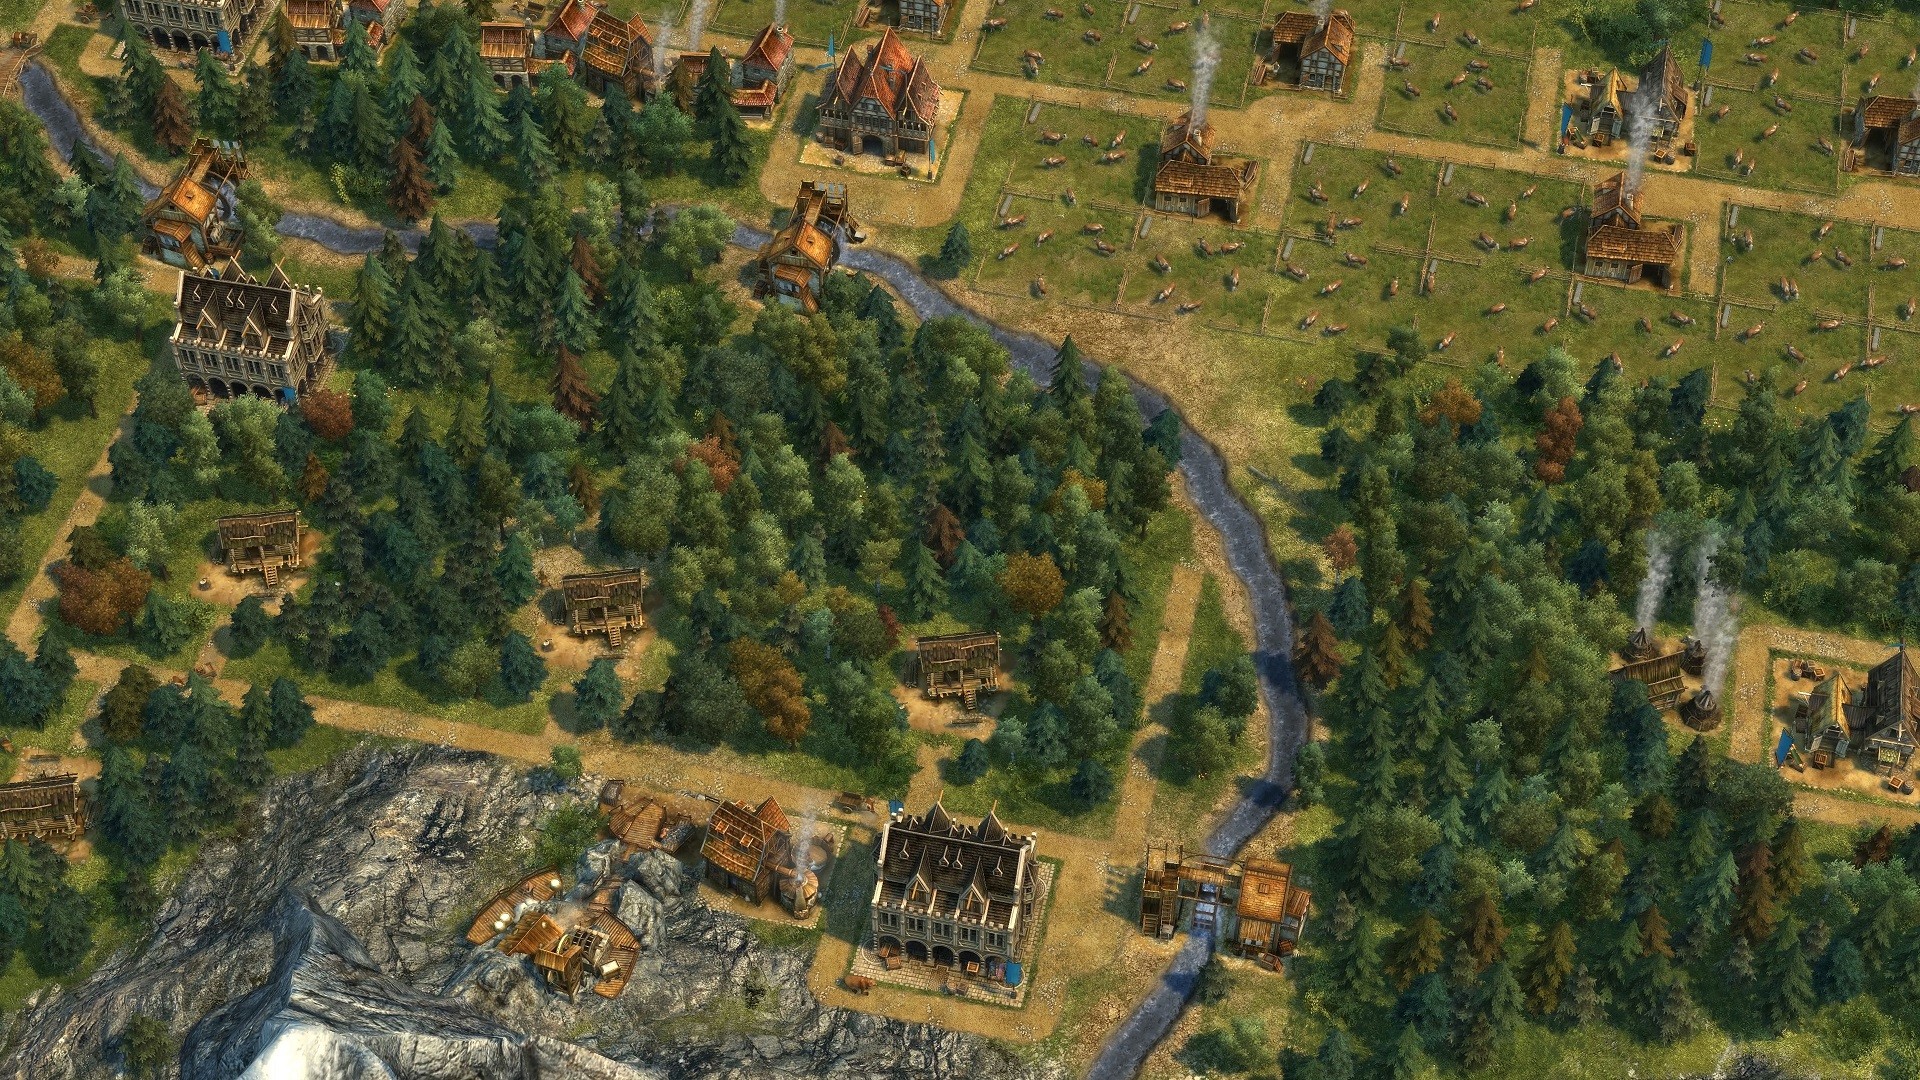 find anno 1404 venice serial number from gog